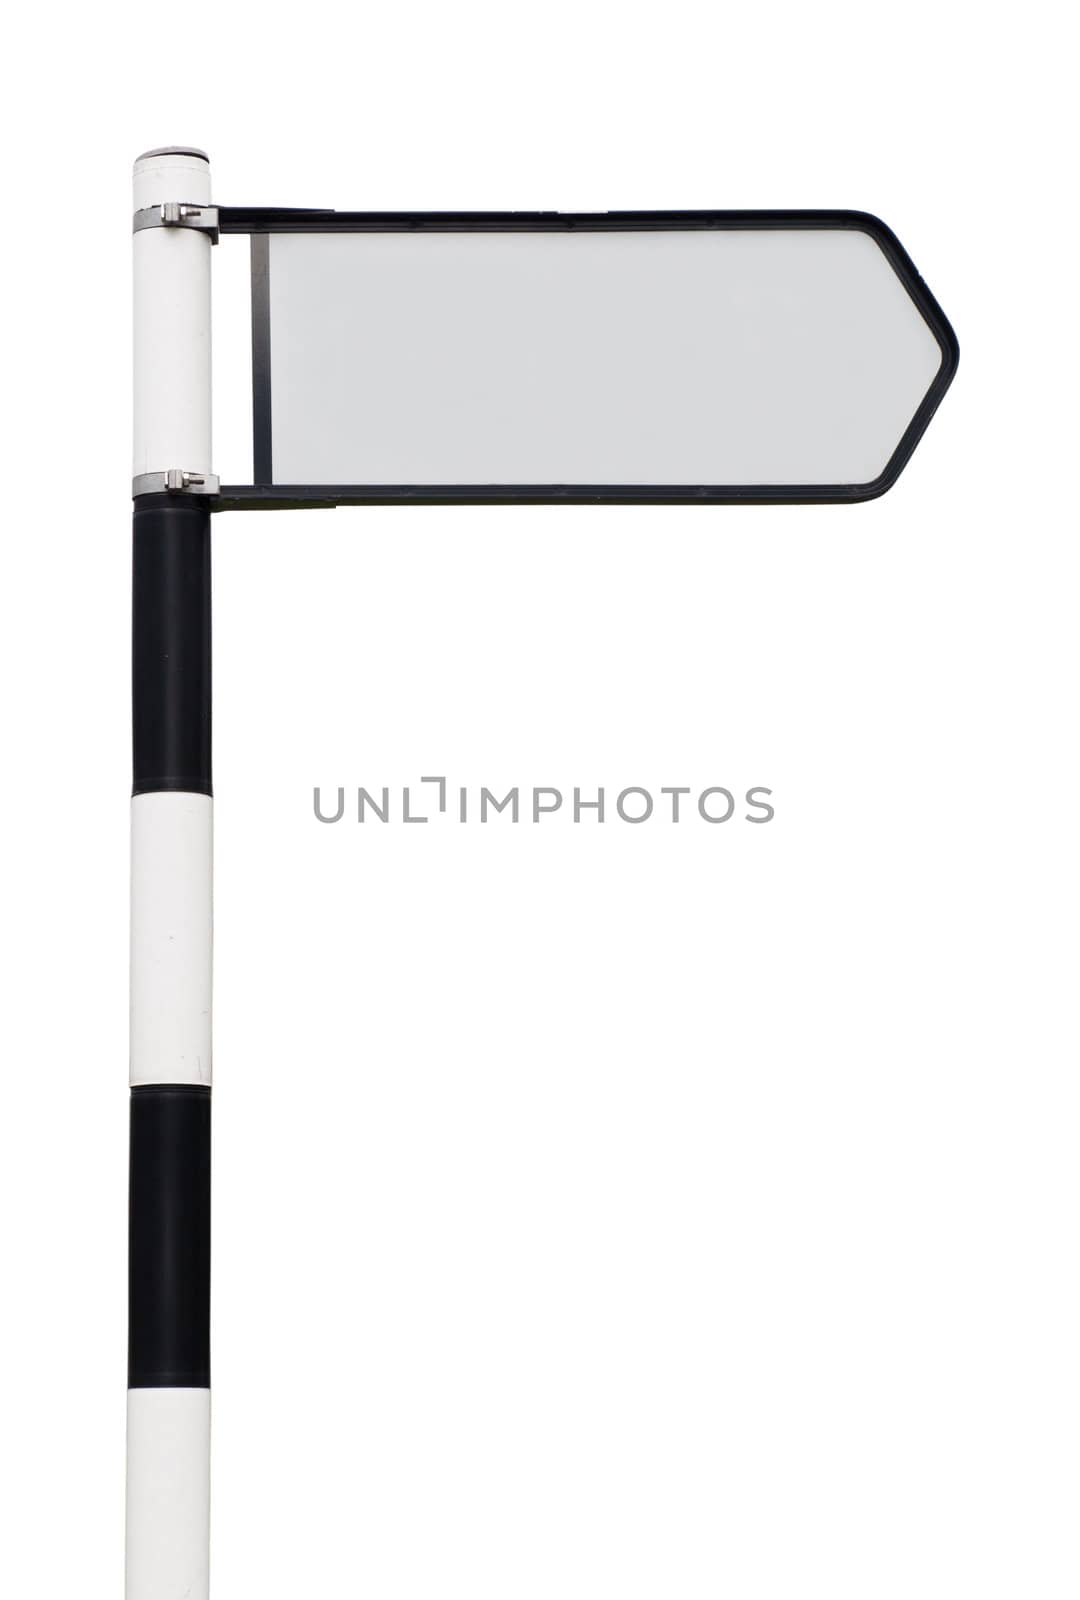 blank black and white road sign with grey copy-space for your design (isolated on white background)